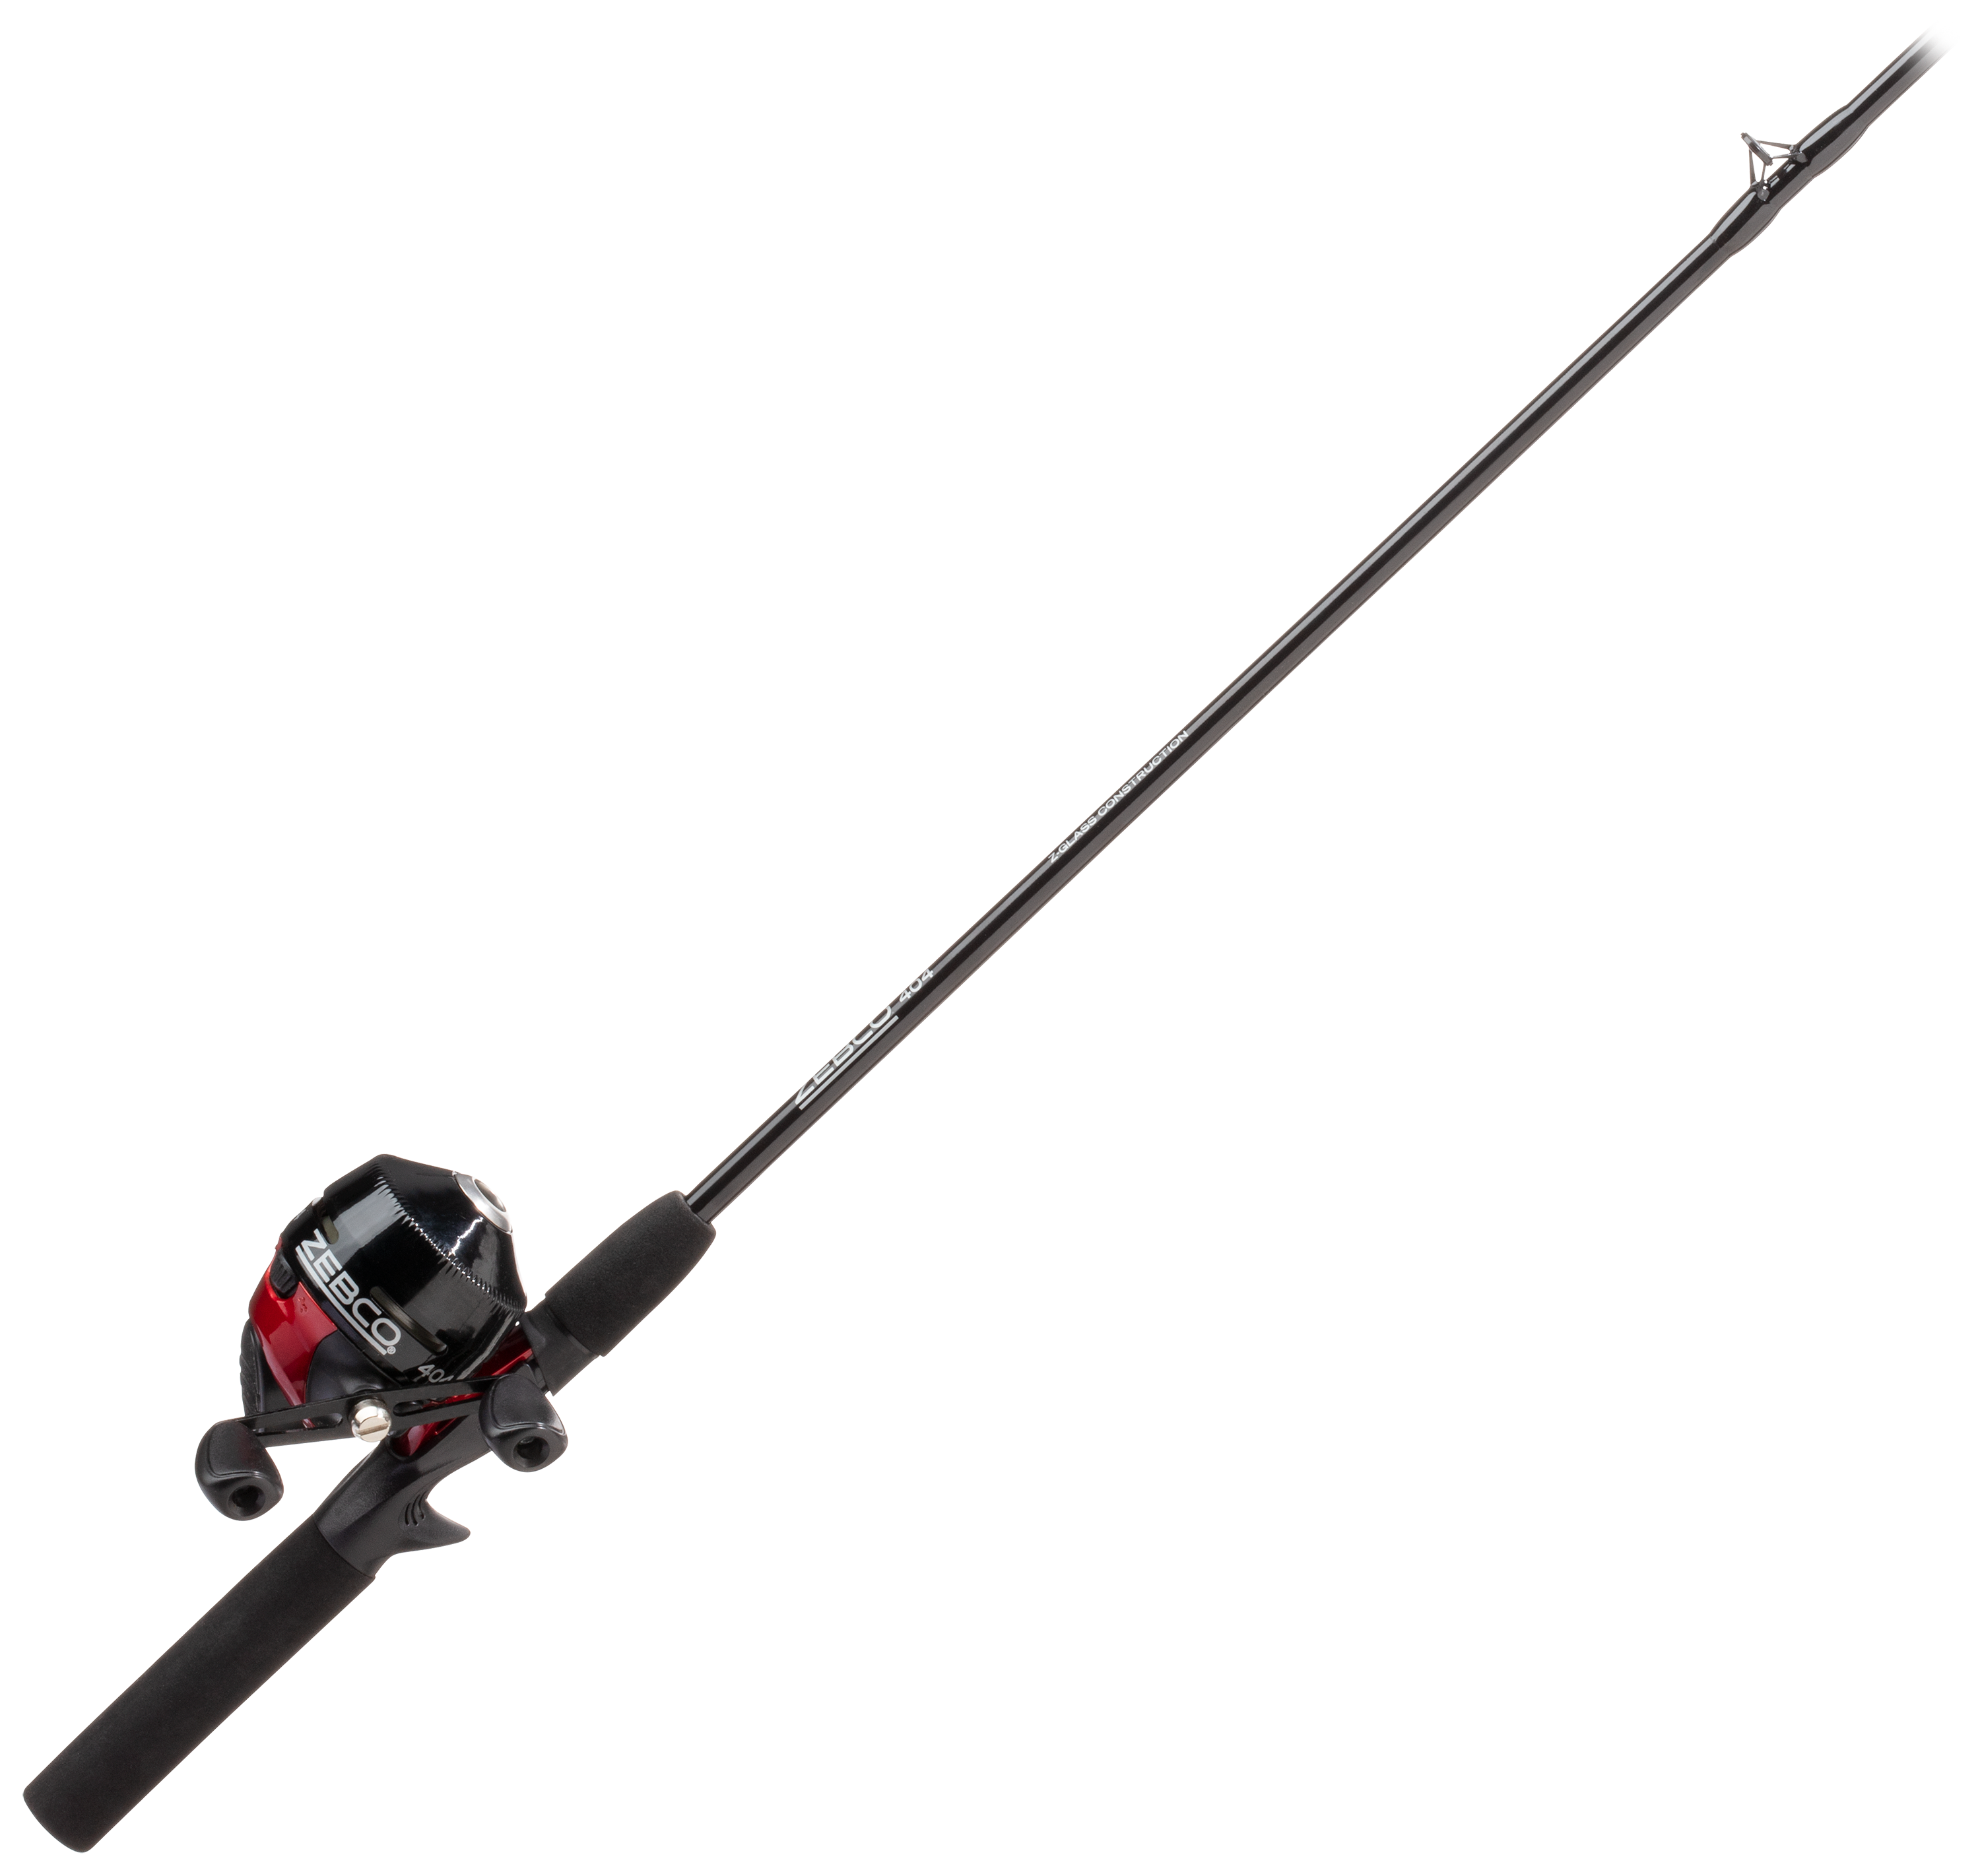 Spin Cast Rod and Reel Combos - Go Salmon Fishing